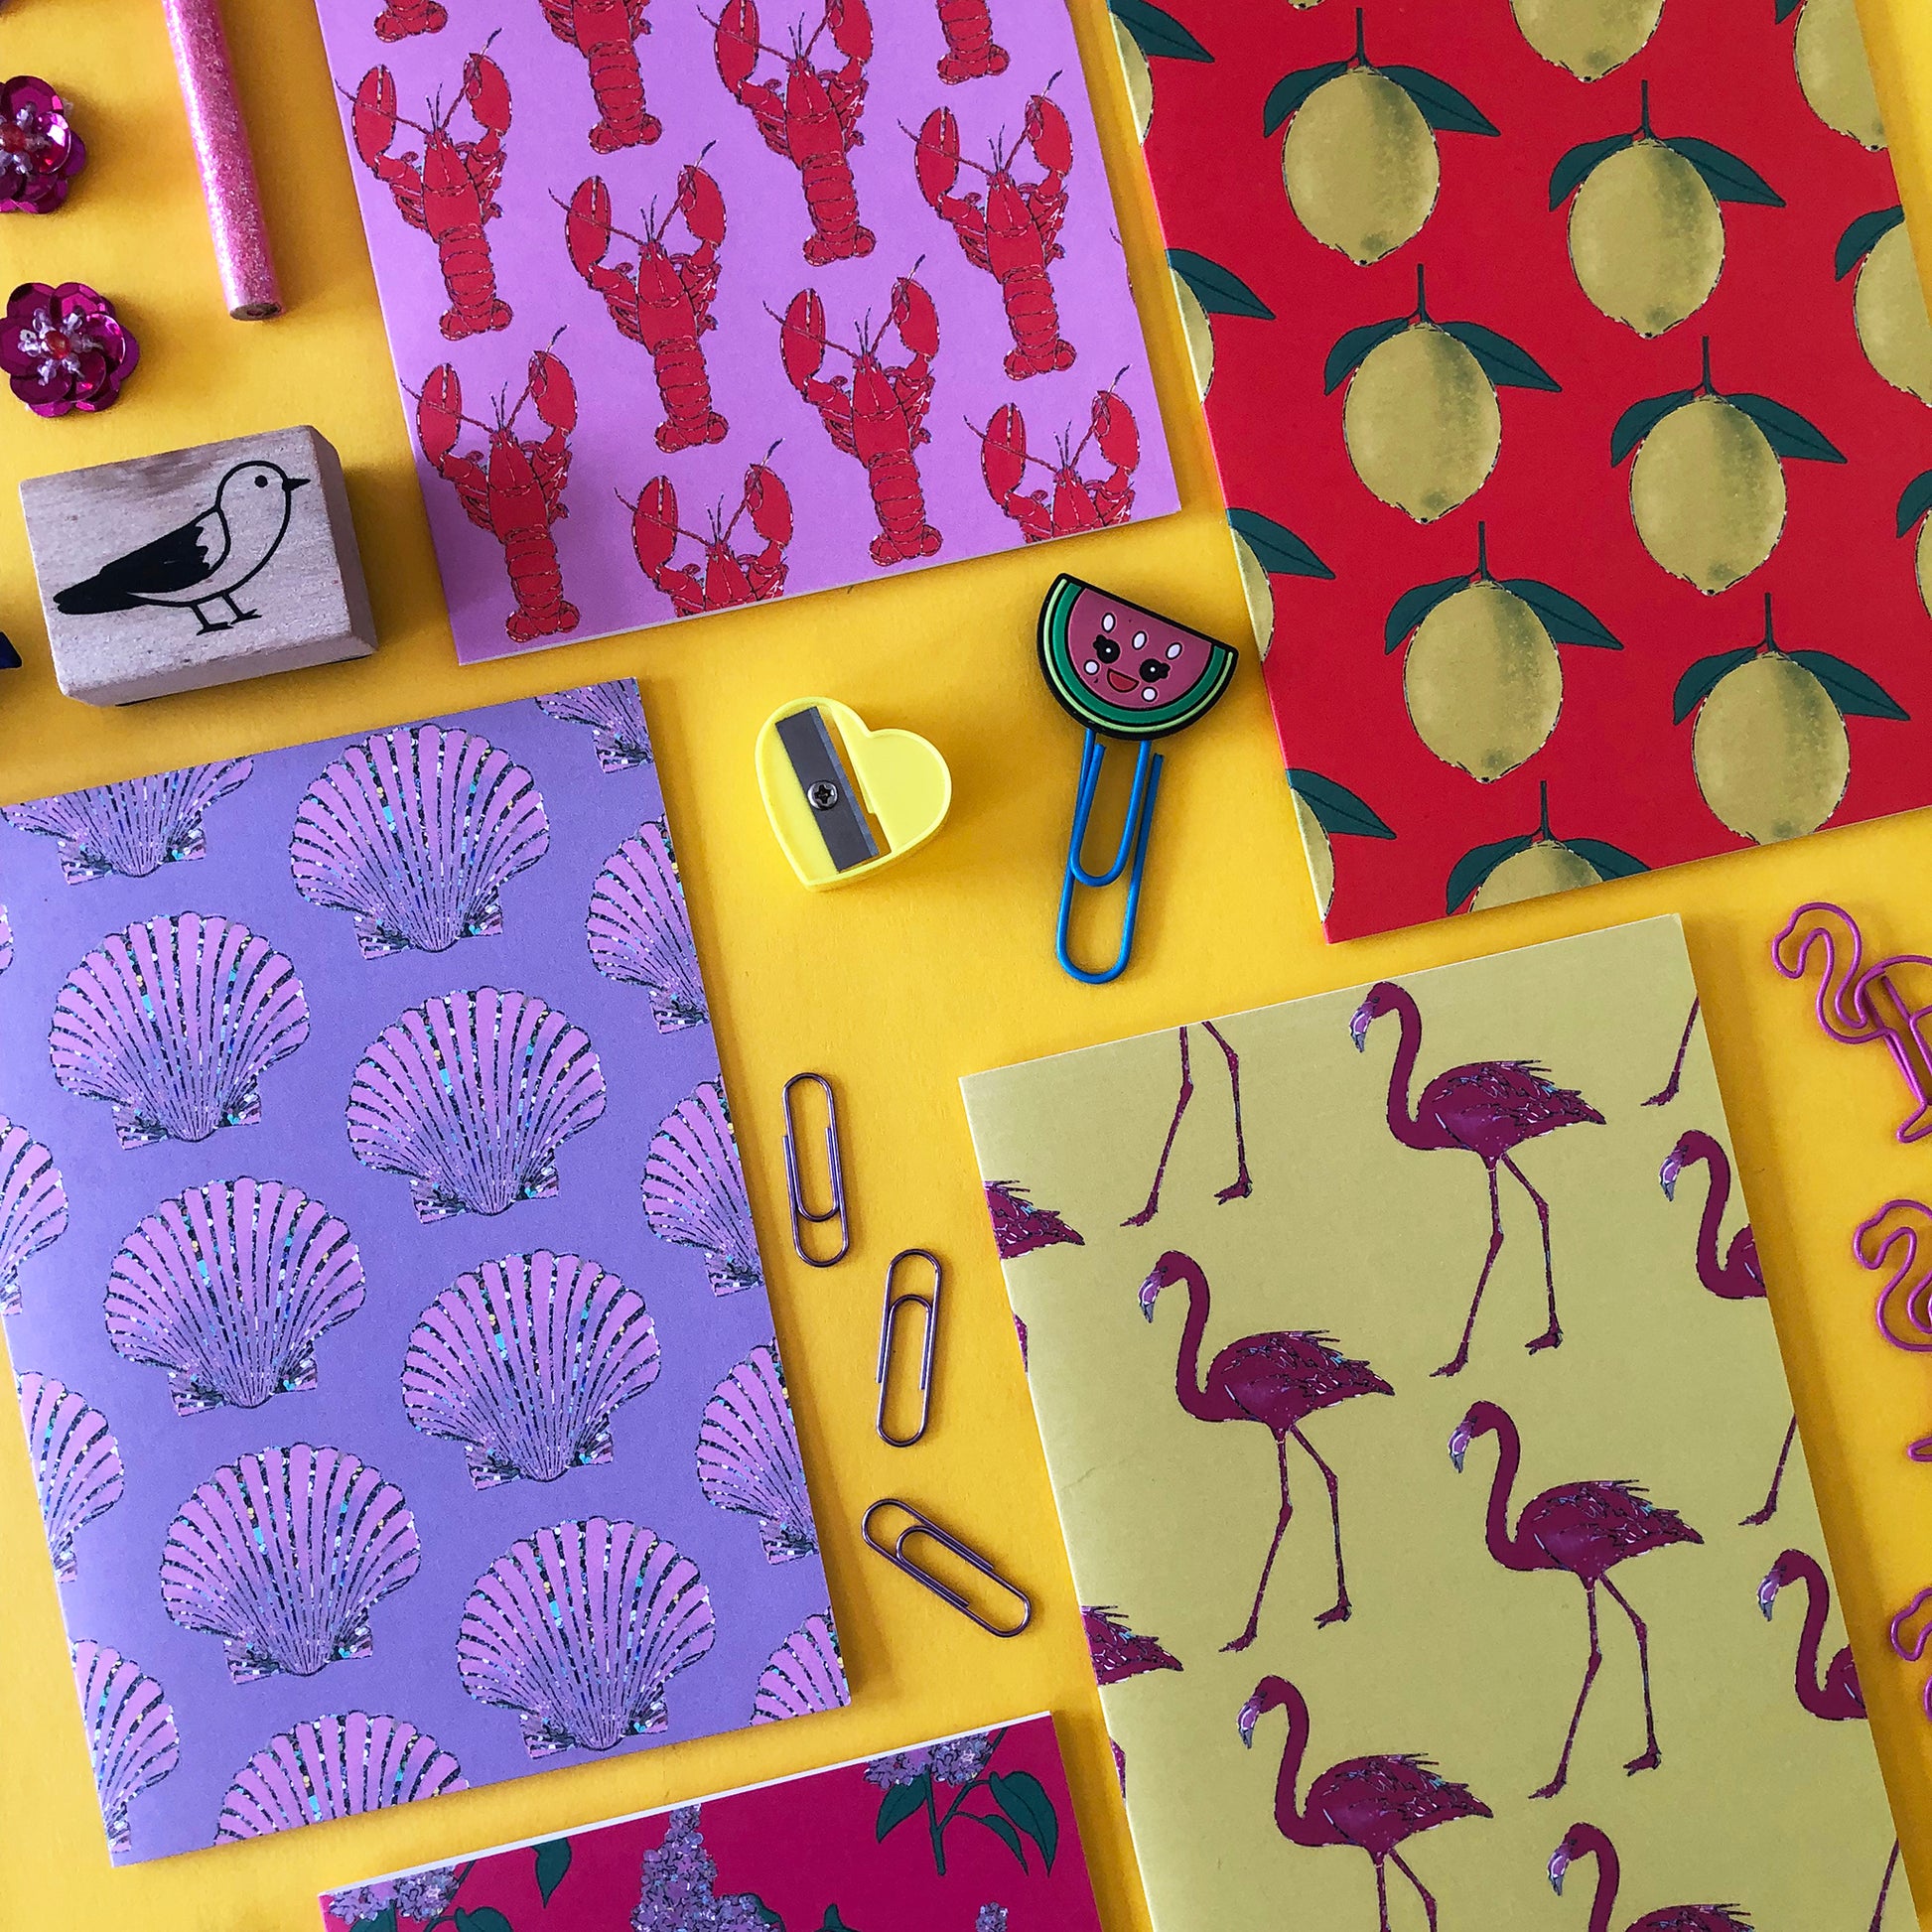 Image shows a set of 5 illustrated notecards featuring vibrant summer patterns.